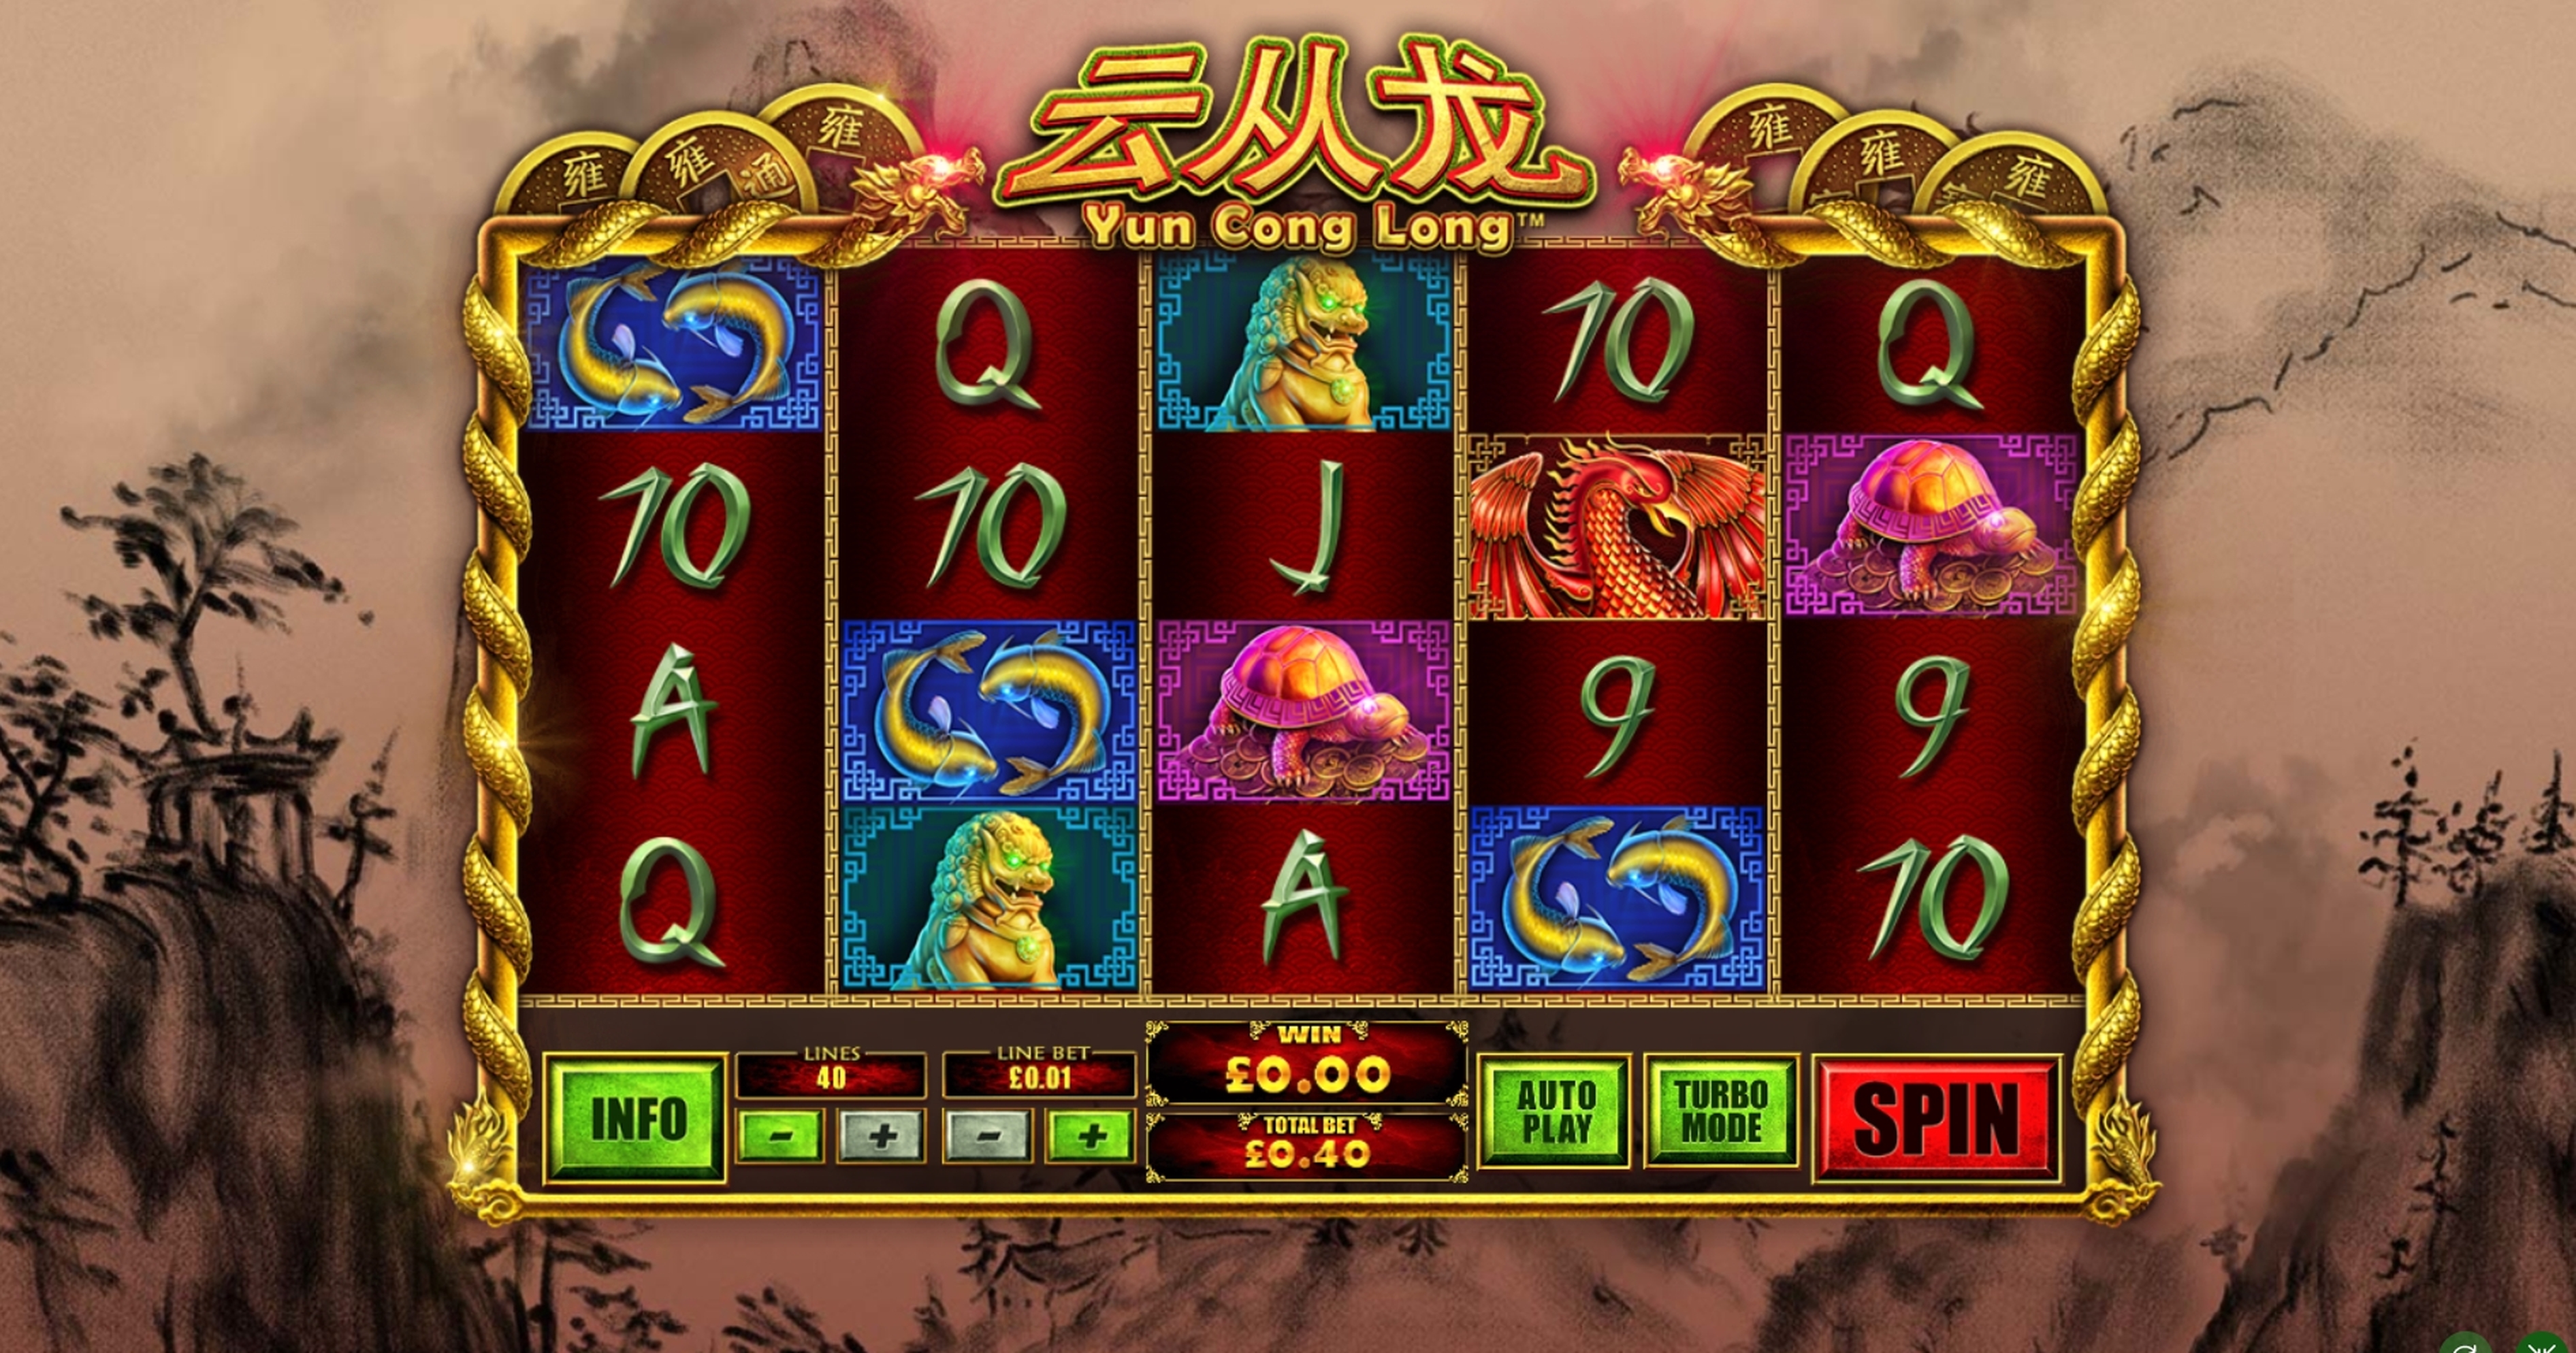 Reels in Yun Cong Long Slot Game by Playtech